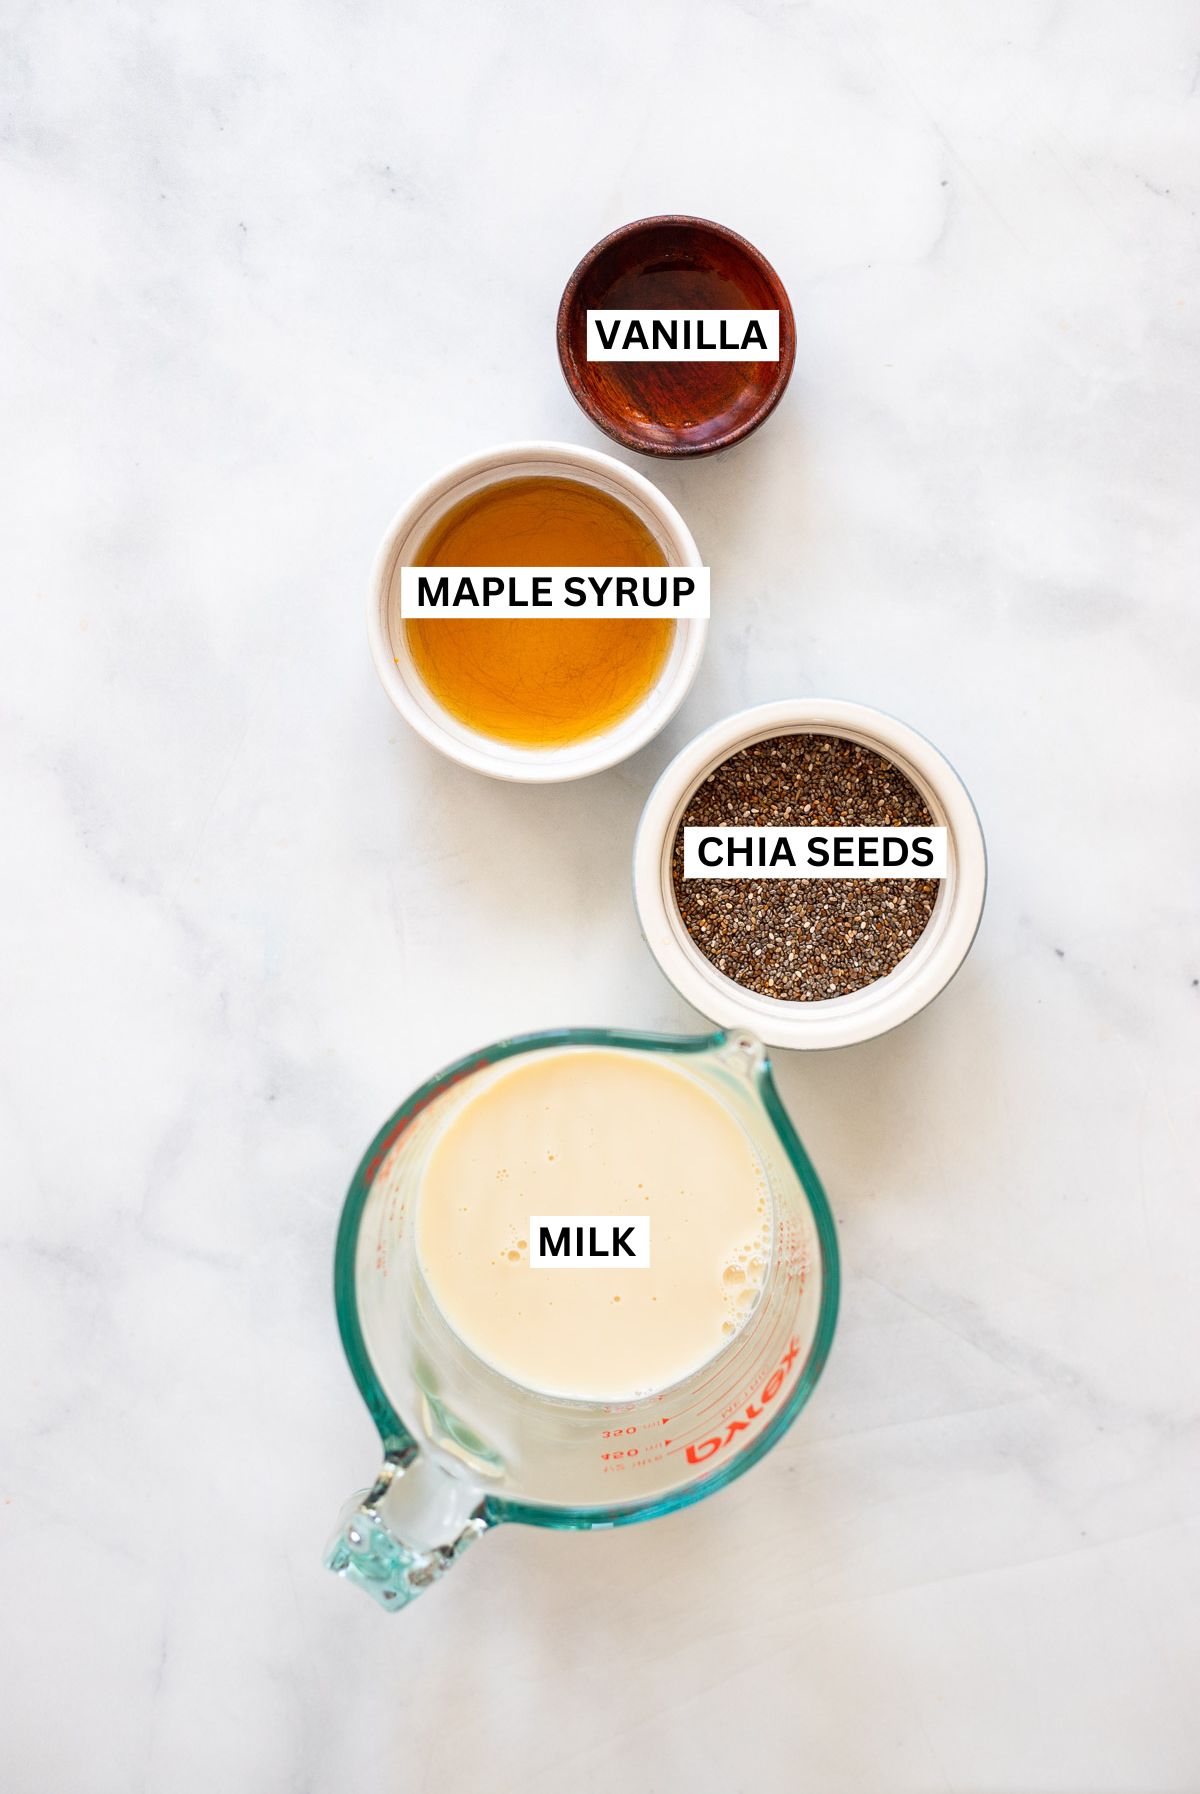 vanilla chia seed pudding ingredients in small dishes on a white background with text labels.